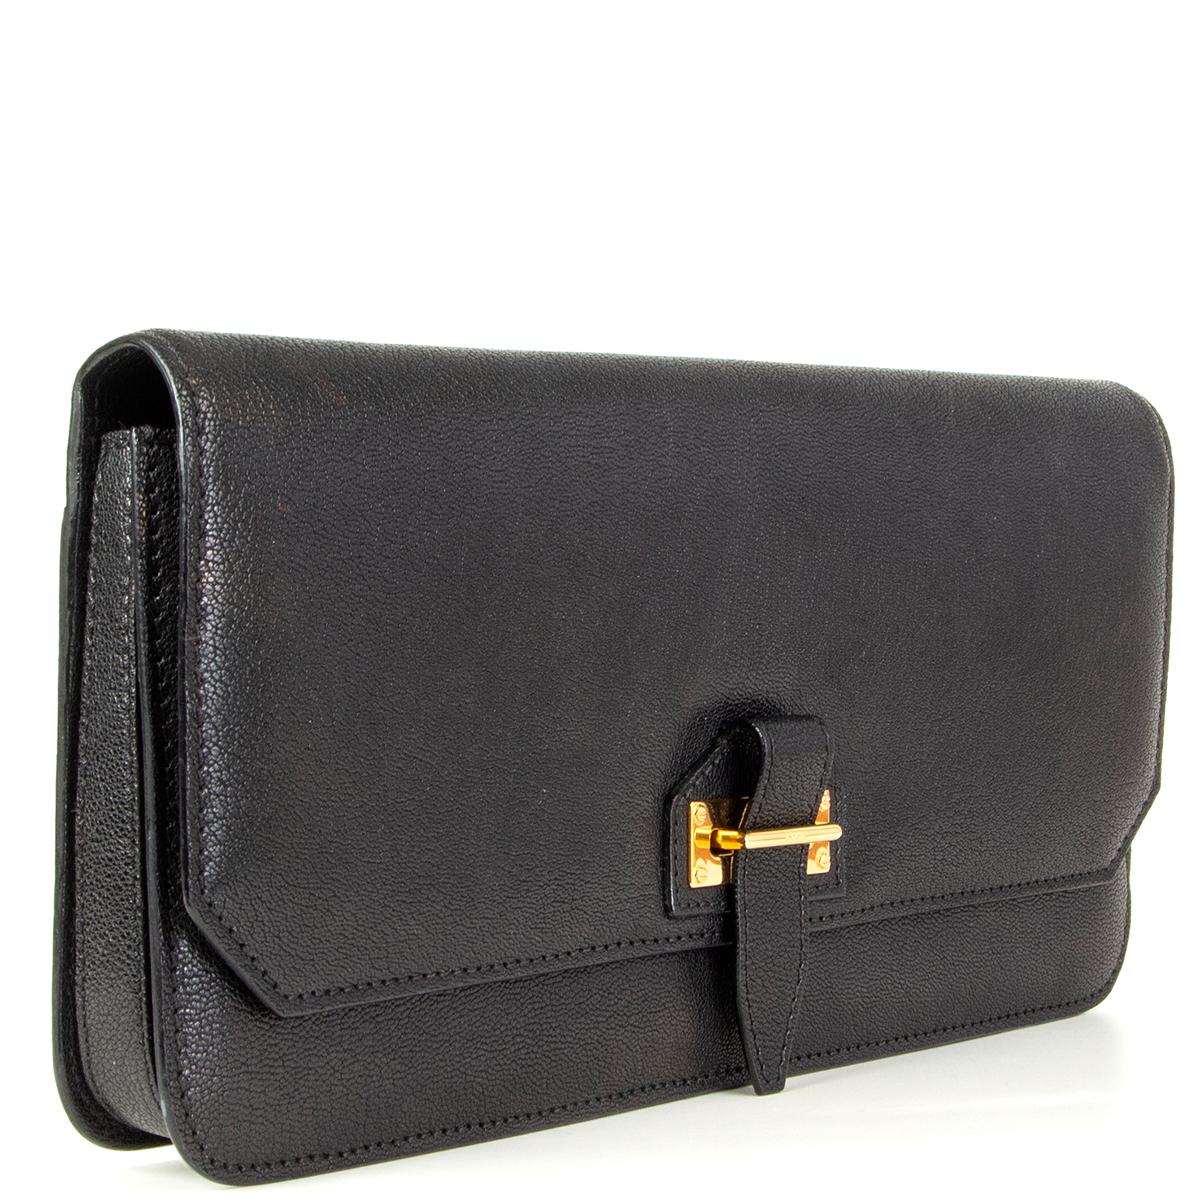 Tom Ford clutch in black grained calfskin with gold-tone metal luck. Divided in three compartements and lined in black microfibre. Has been carried and is in excellent condition. 

Height 15cm (5.9in)
Width 30cm (11.7in)
Depth 3cm (1.2in)
